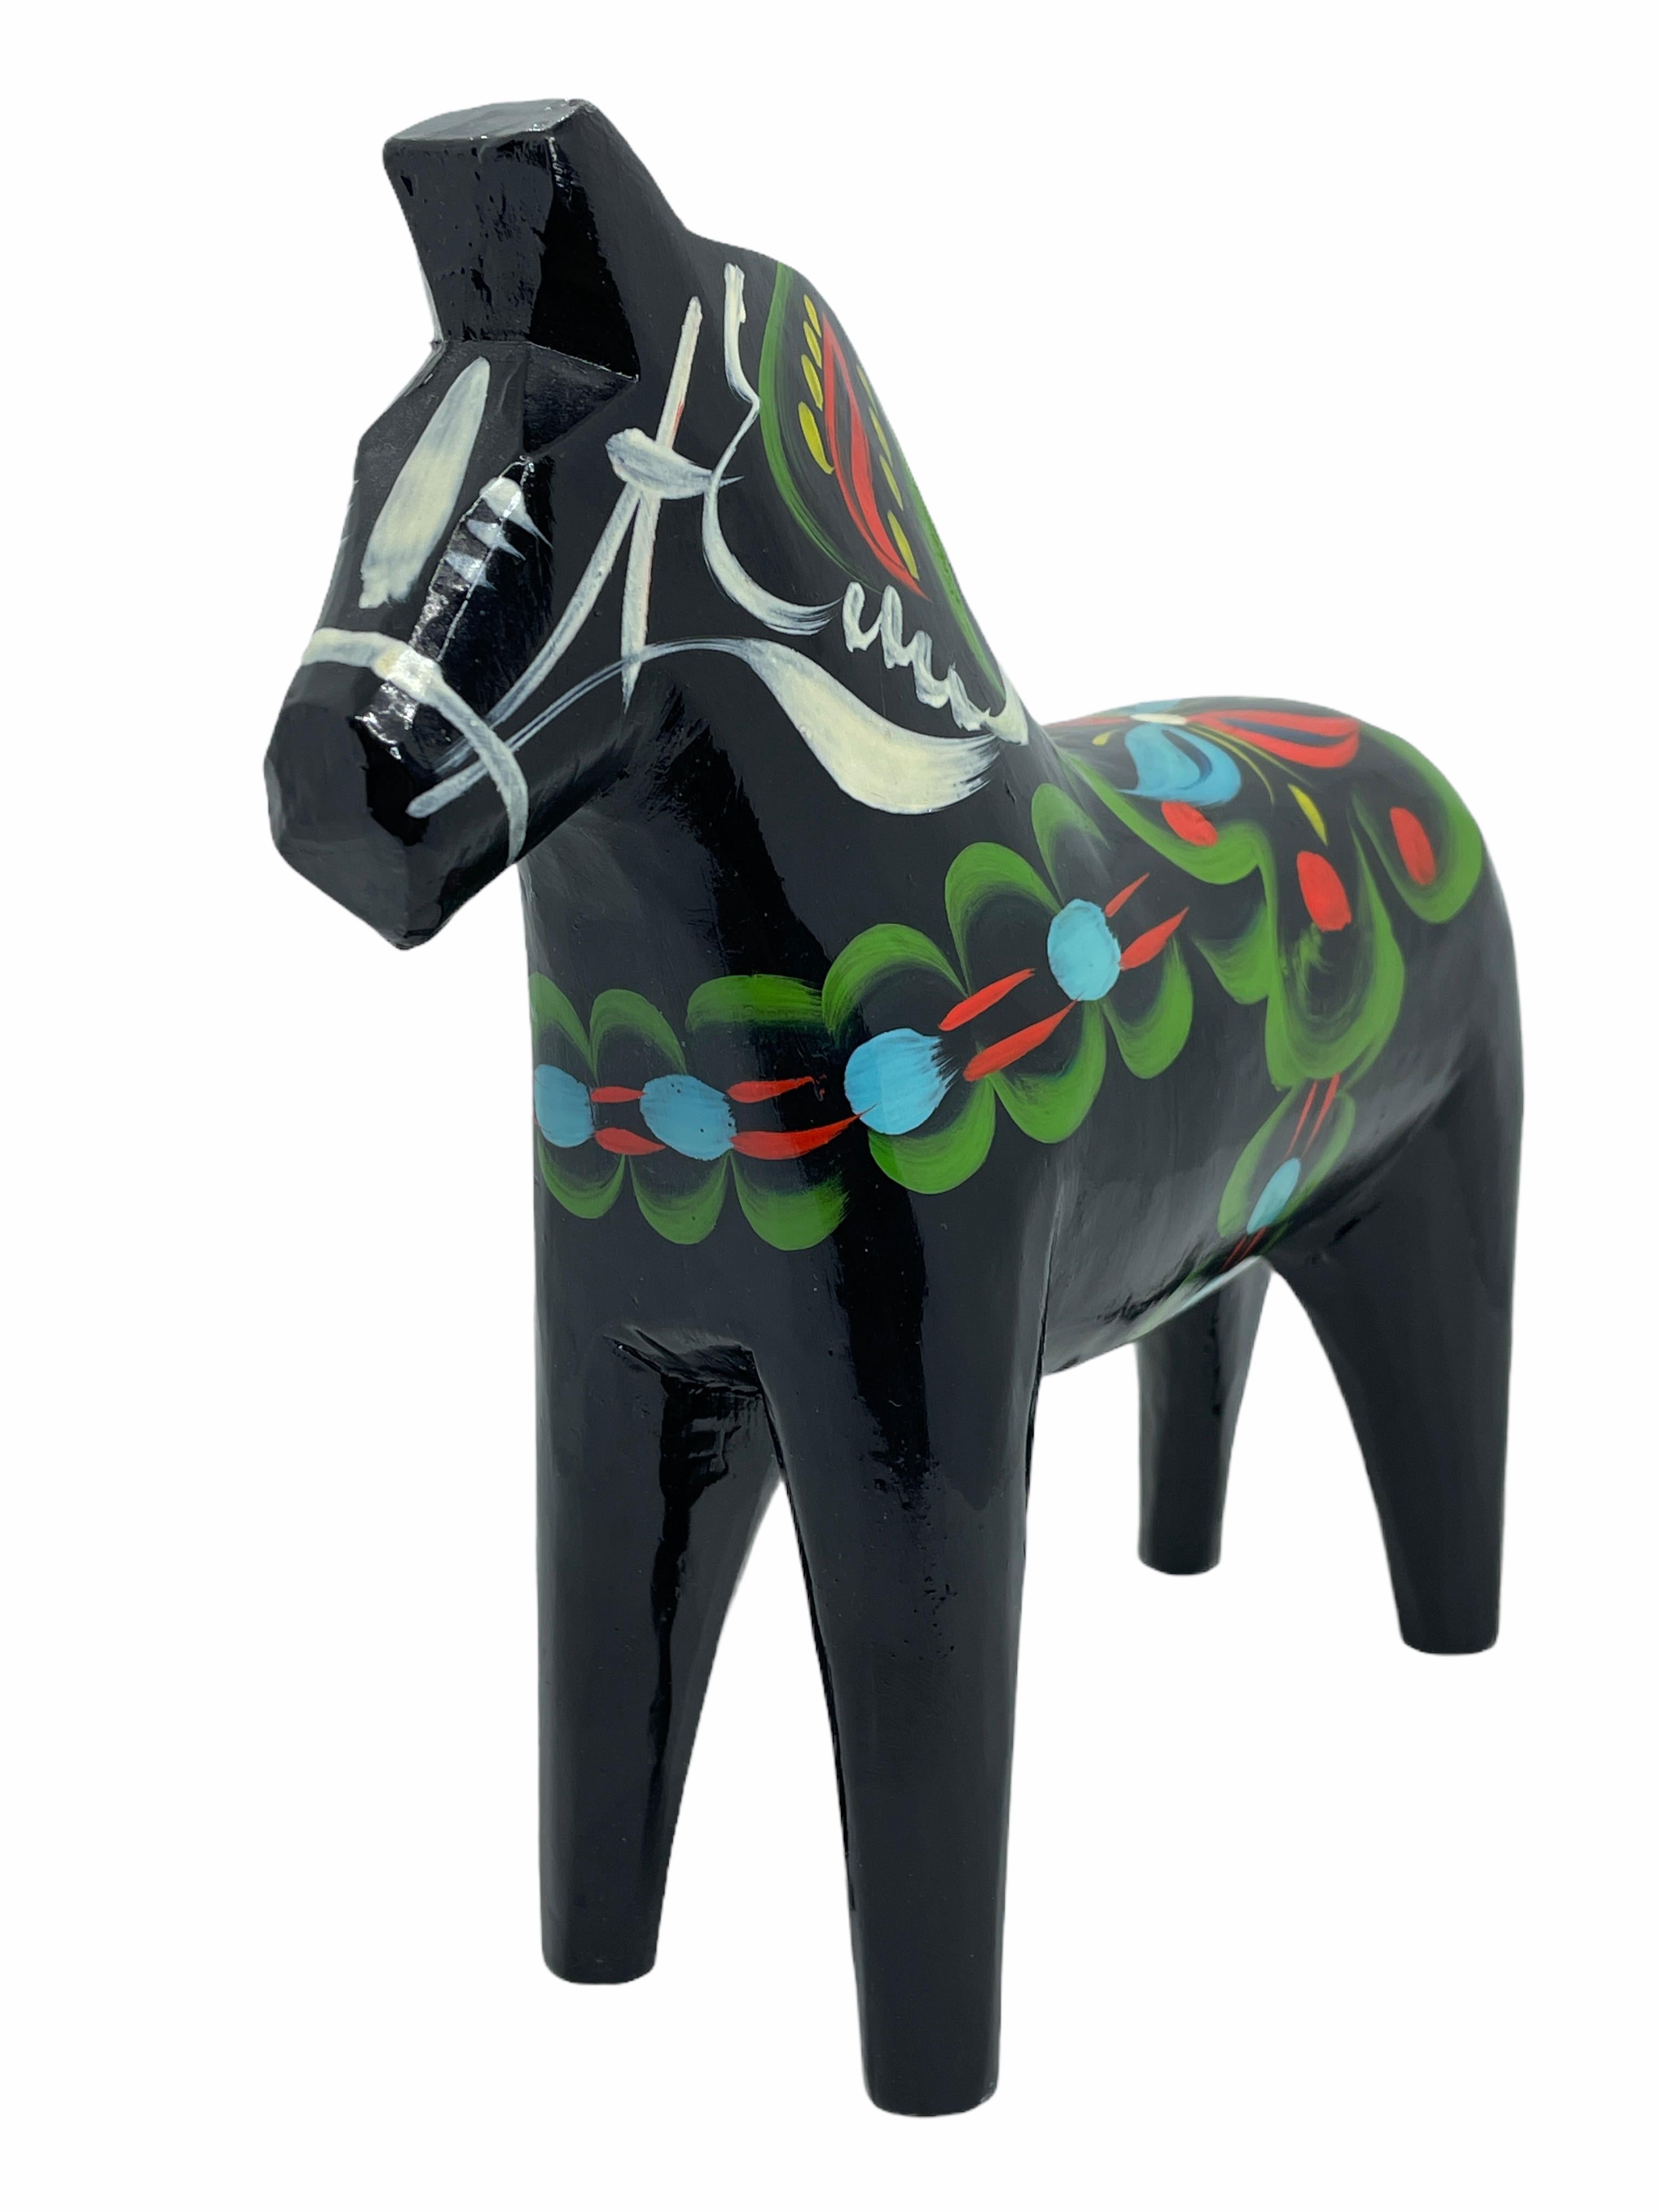 Nils Olsson Painted Dala Horse Made in Sweden Natural Wood with Varnish Vintage 1970s 70s Home Decor